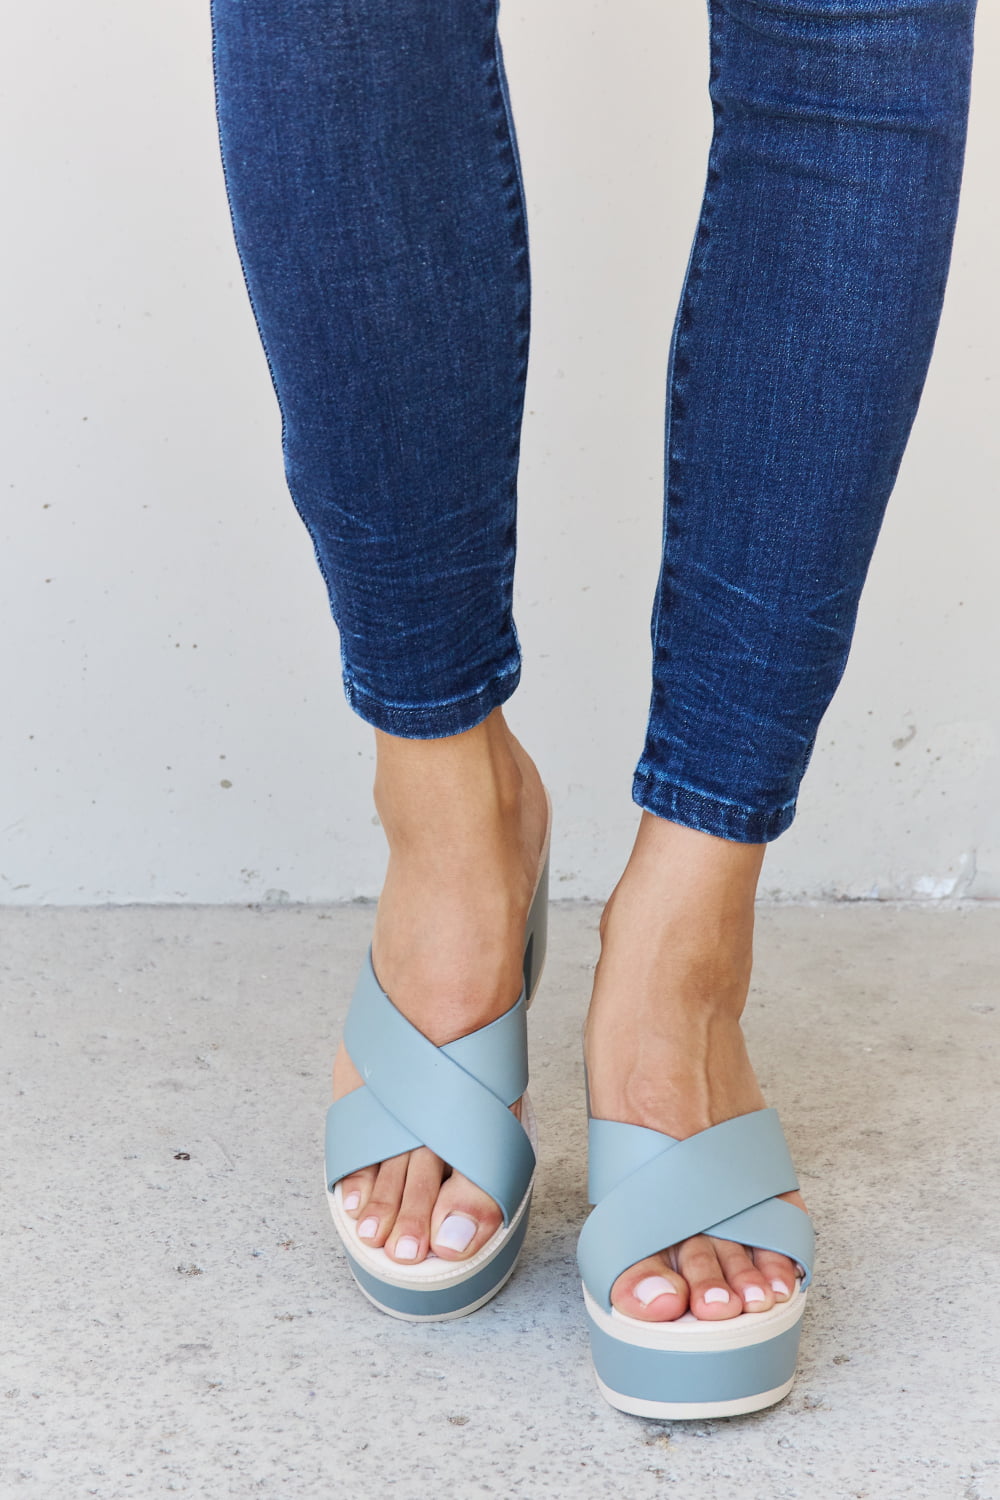 Gray Weeboo Cherish The Moments Contrast Platform Sandals in Misty Blue Sentient Beauty Fashions Shoes